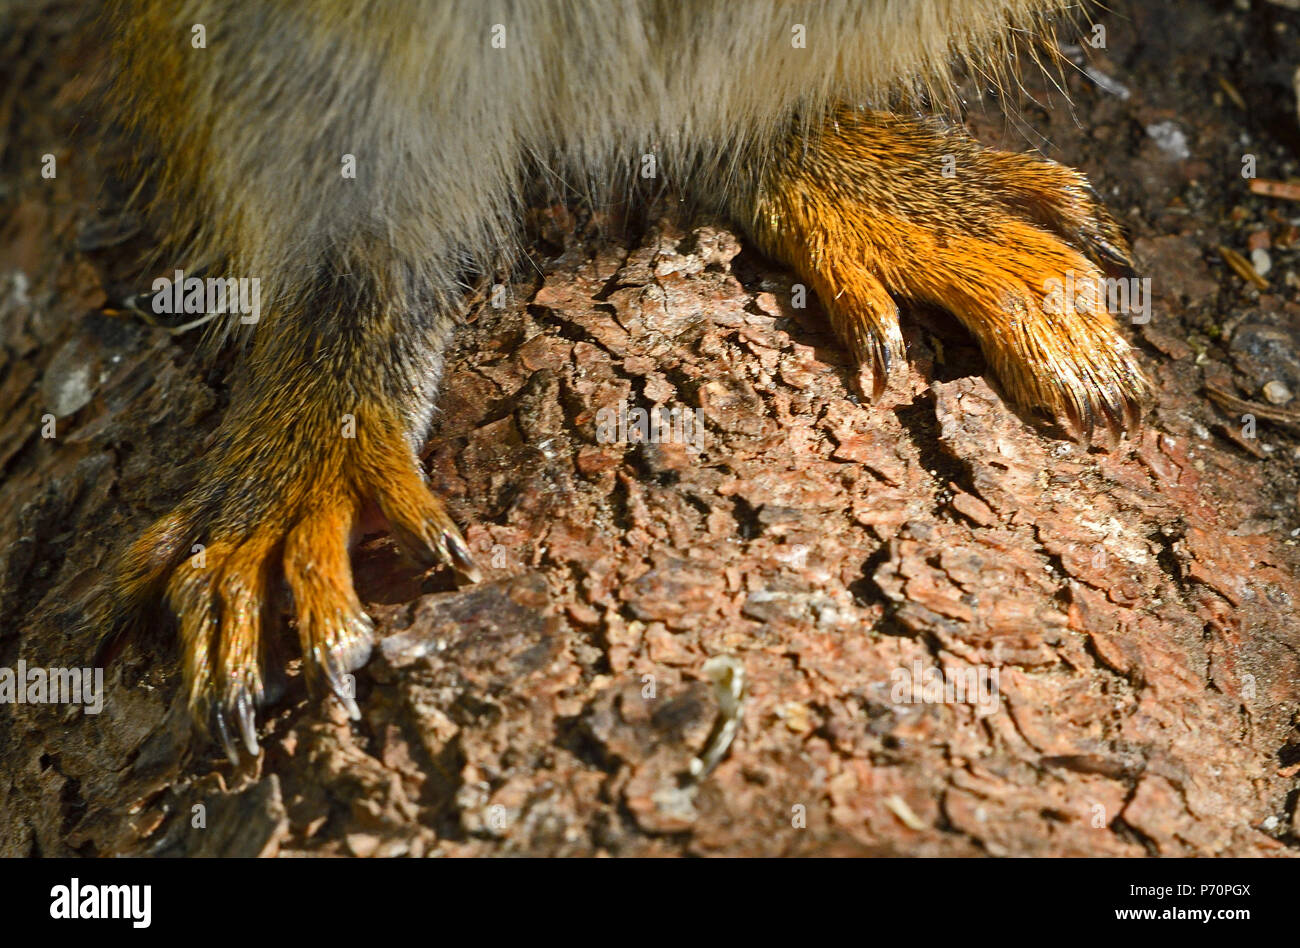 A close up horizontal image of a red squirrels 'Tamiasciurus hudsonicus';  hind feet as he sits on rough tree bark. Stock Photo